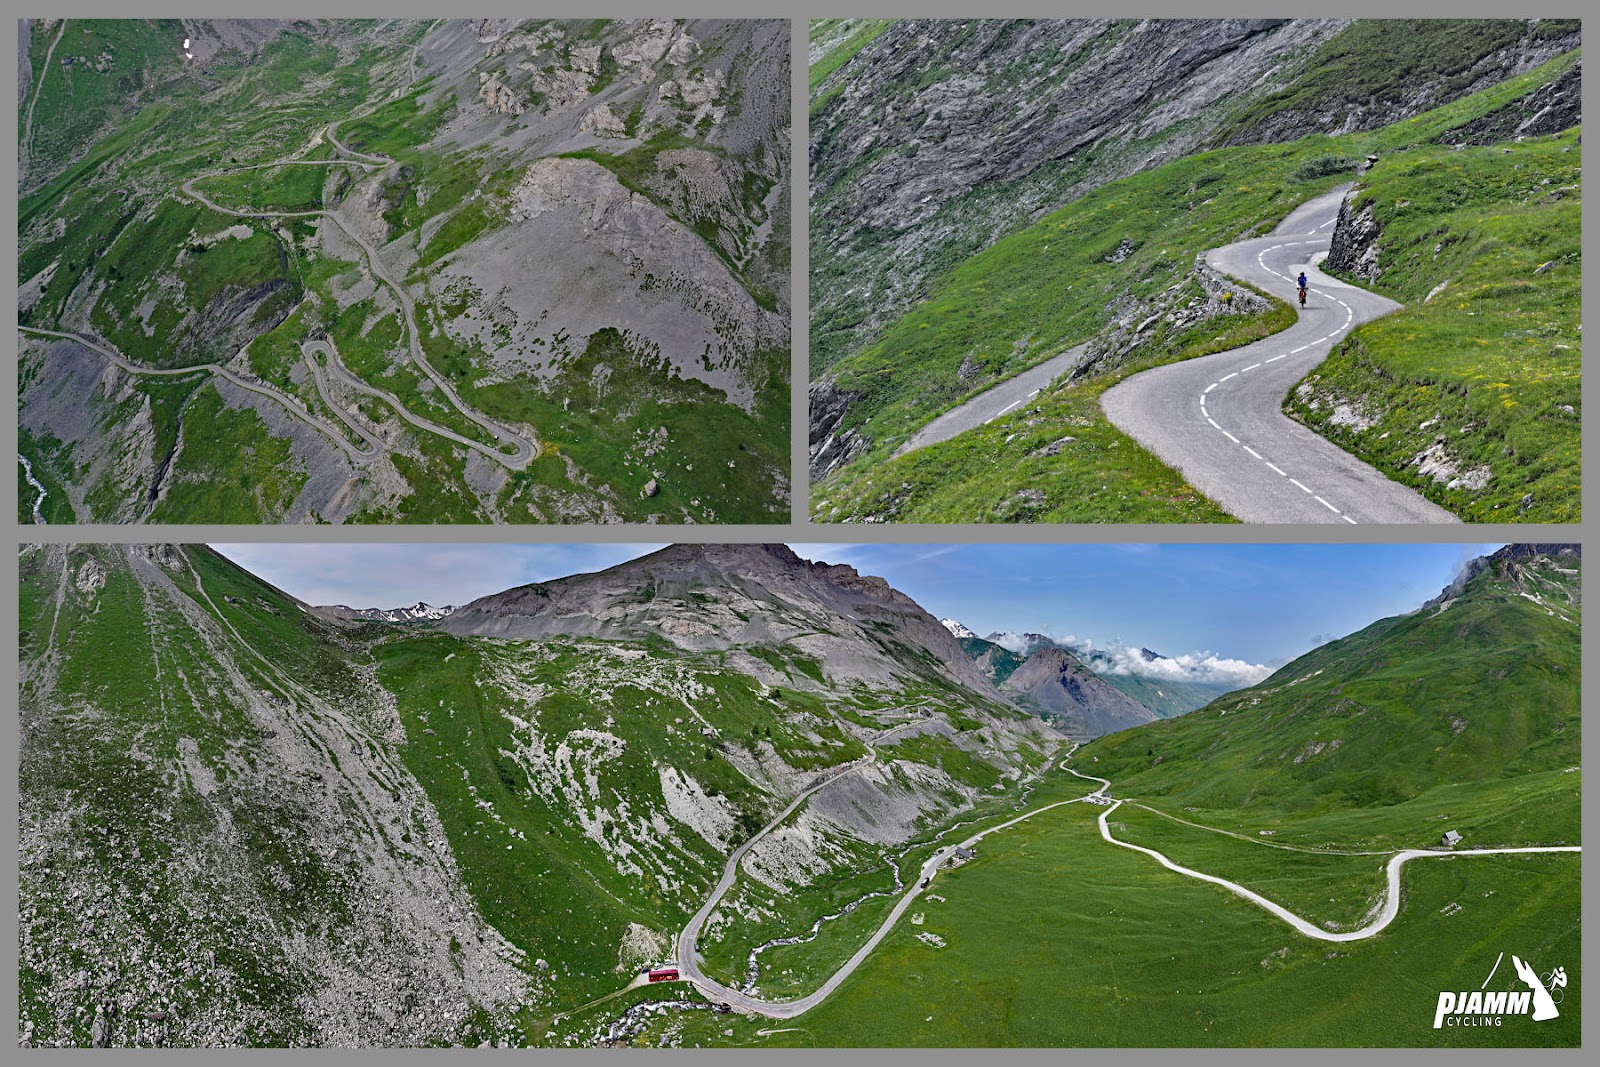 Cycling Col du Galibier from Valloire: photo collage shows aerial drone and panoramic views of hairpin turns at kilometer 10